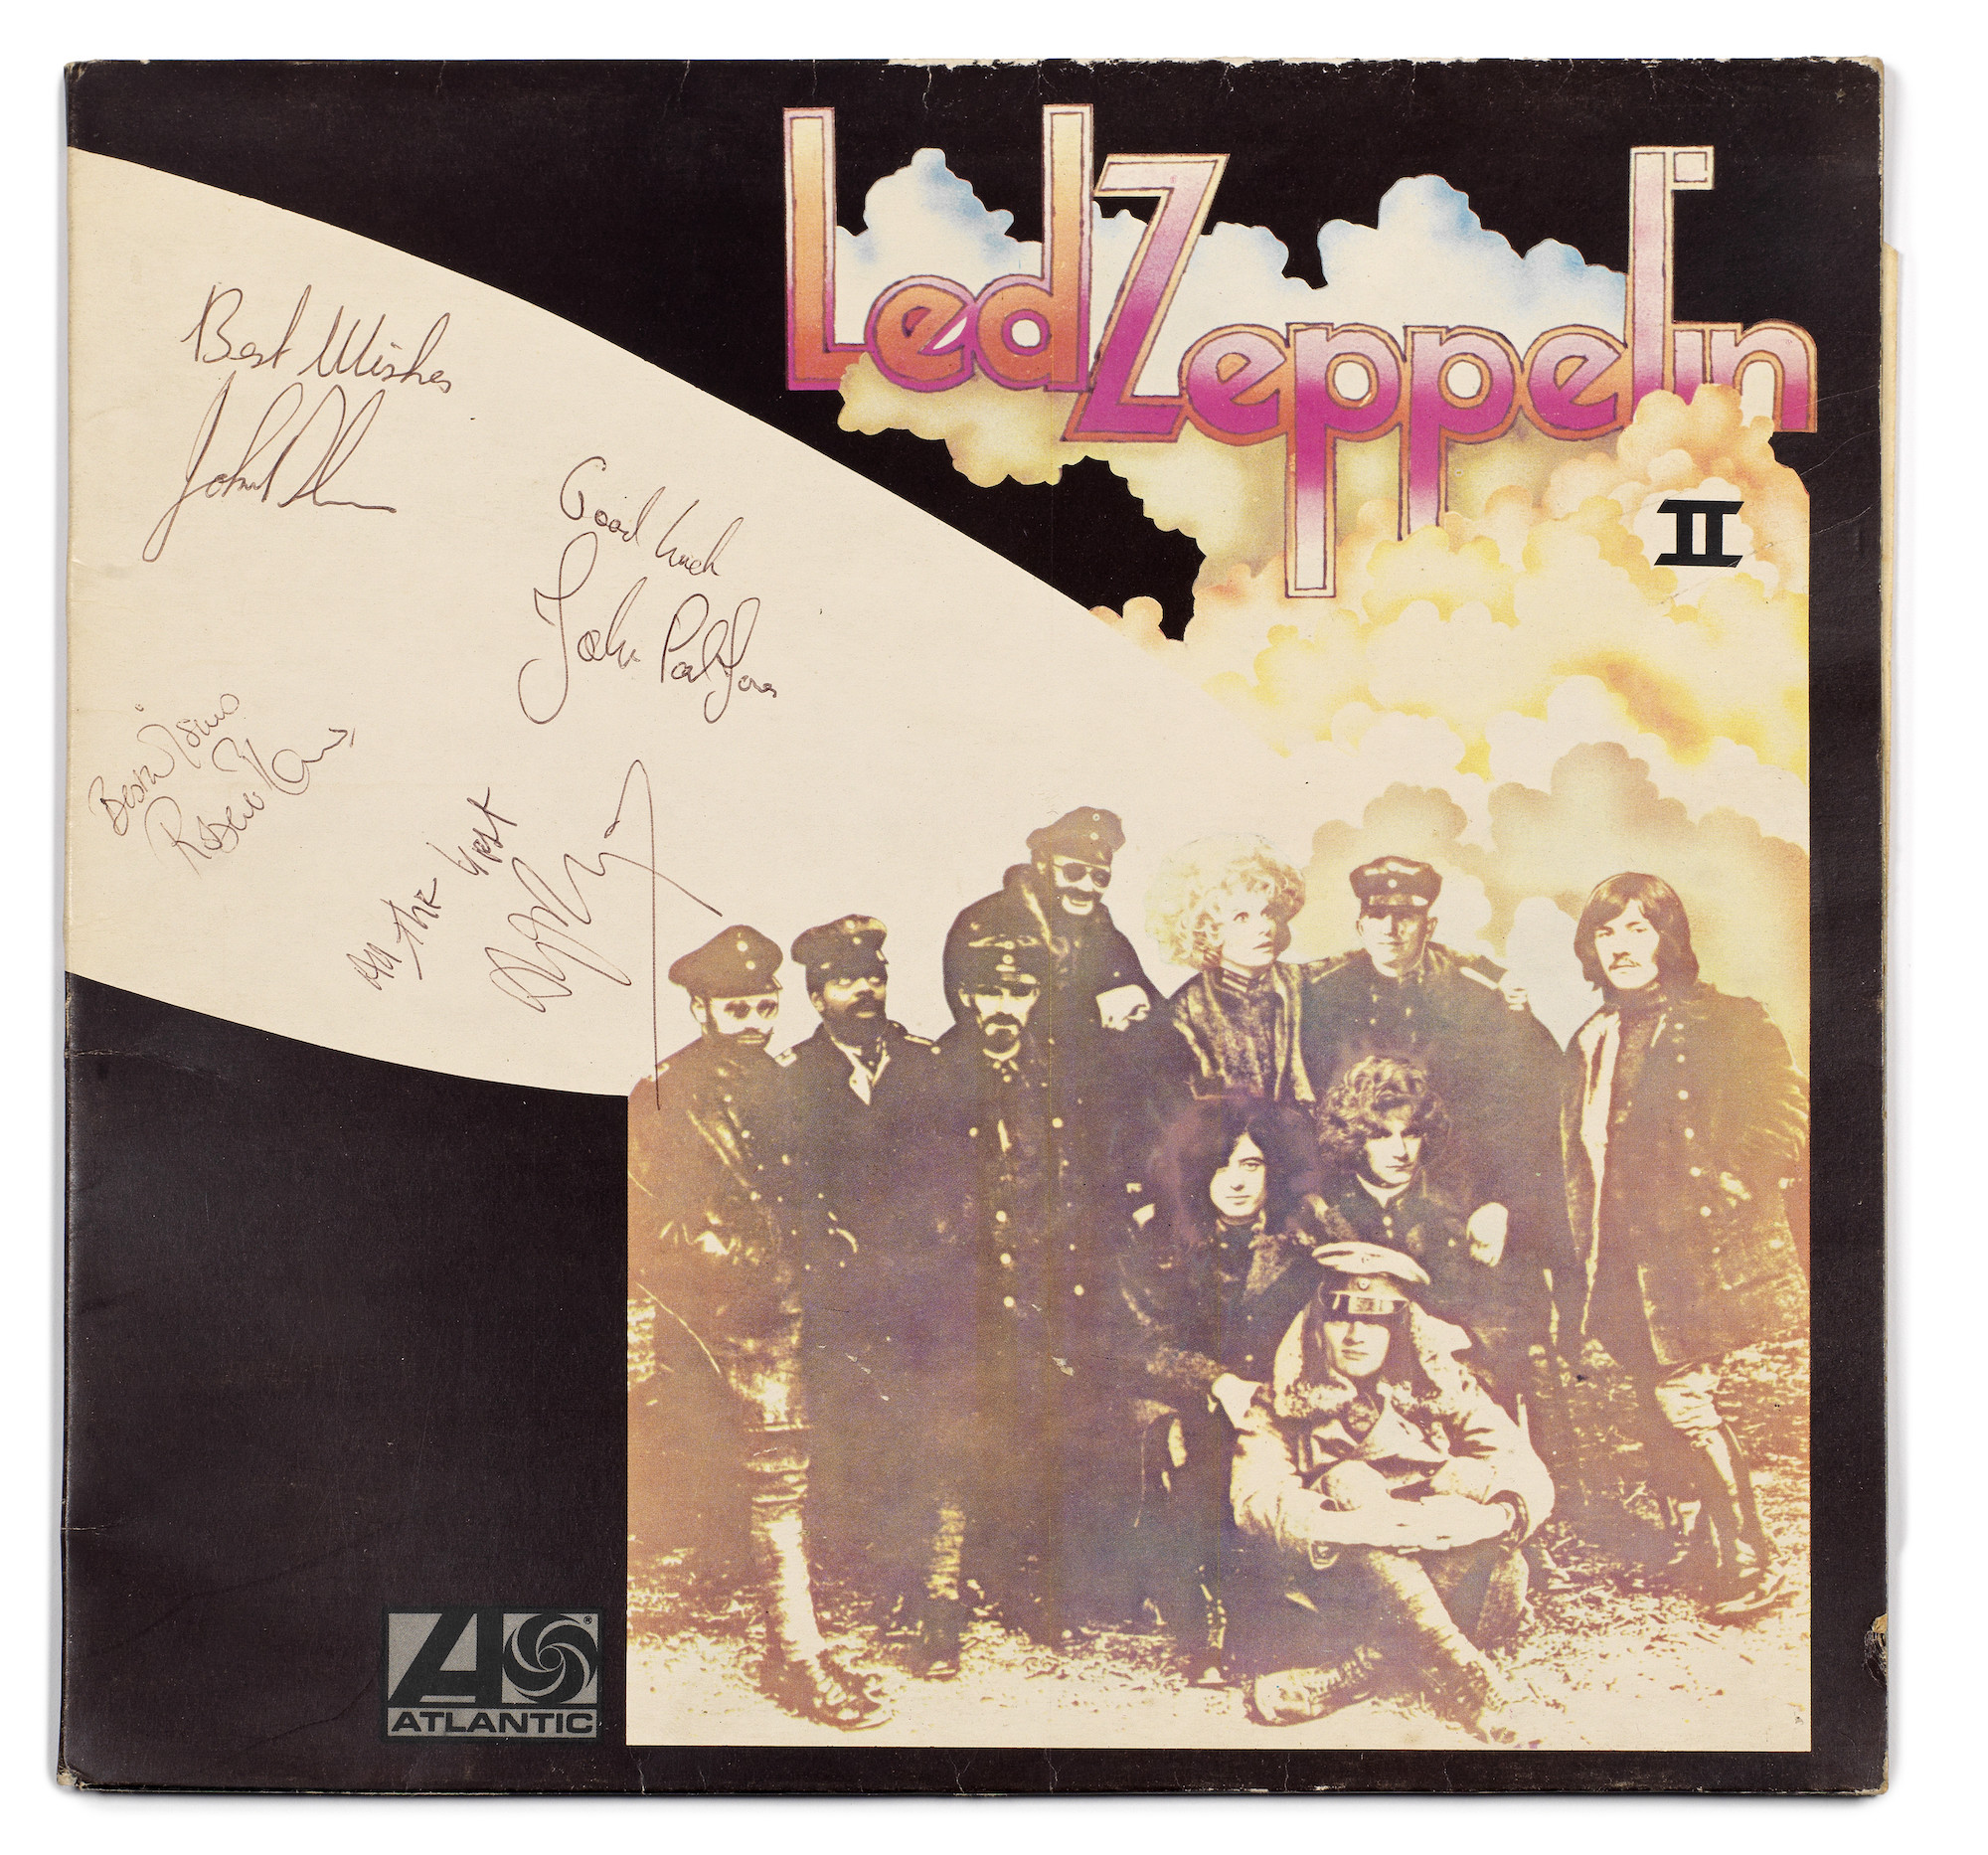 Led Zepplin An Autographed Copy Of The Album Led Zeppelin II, early 70s reissue